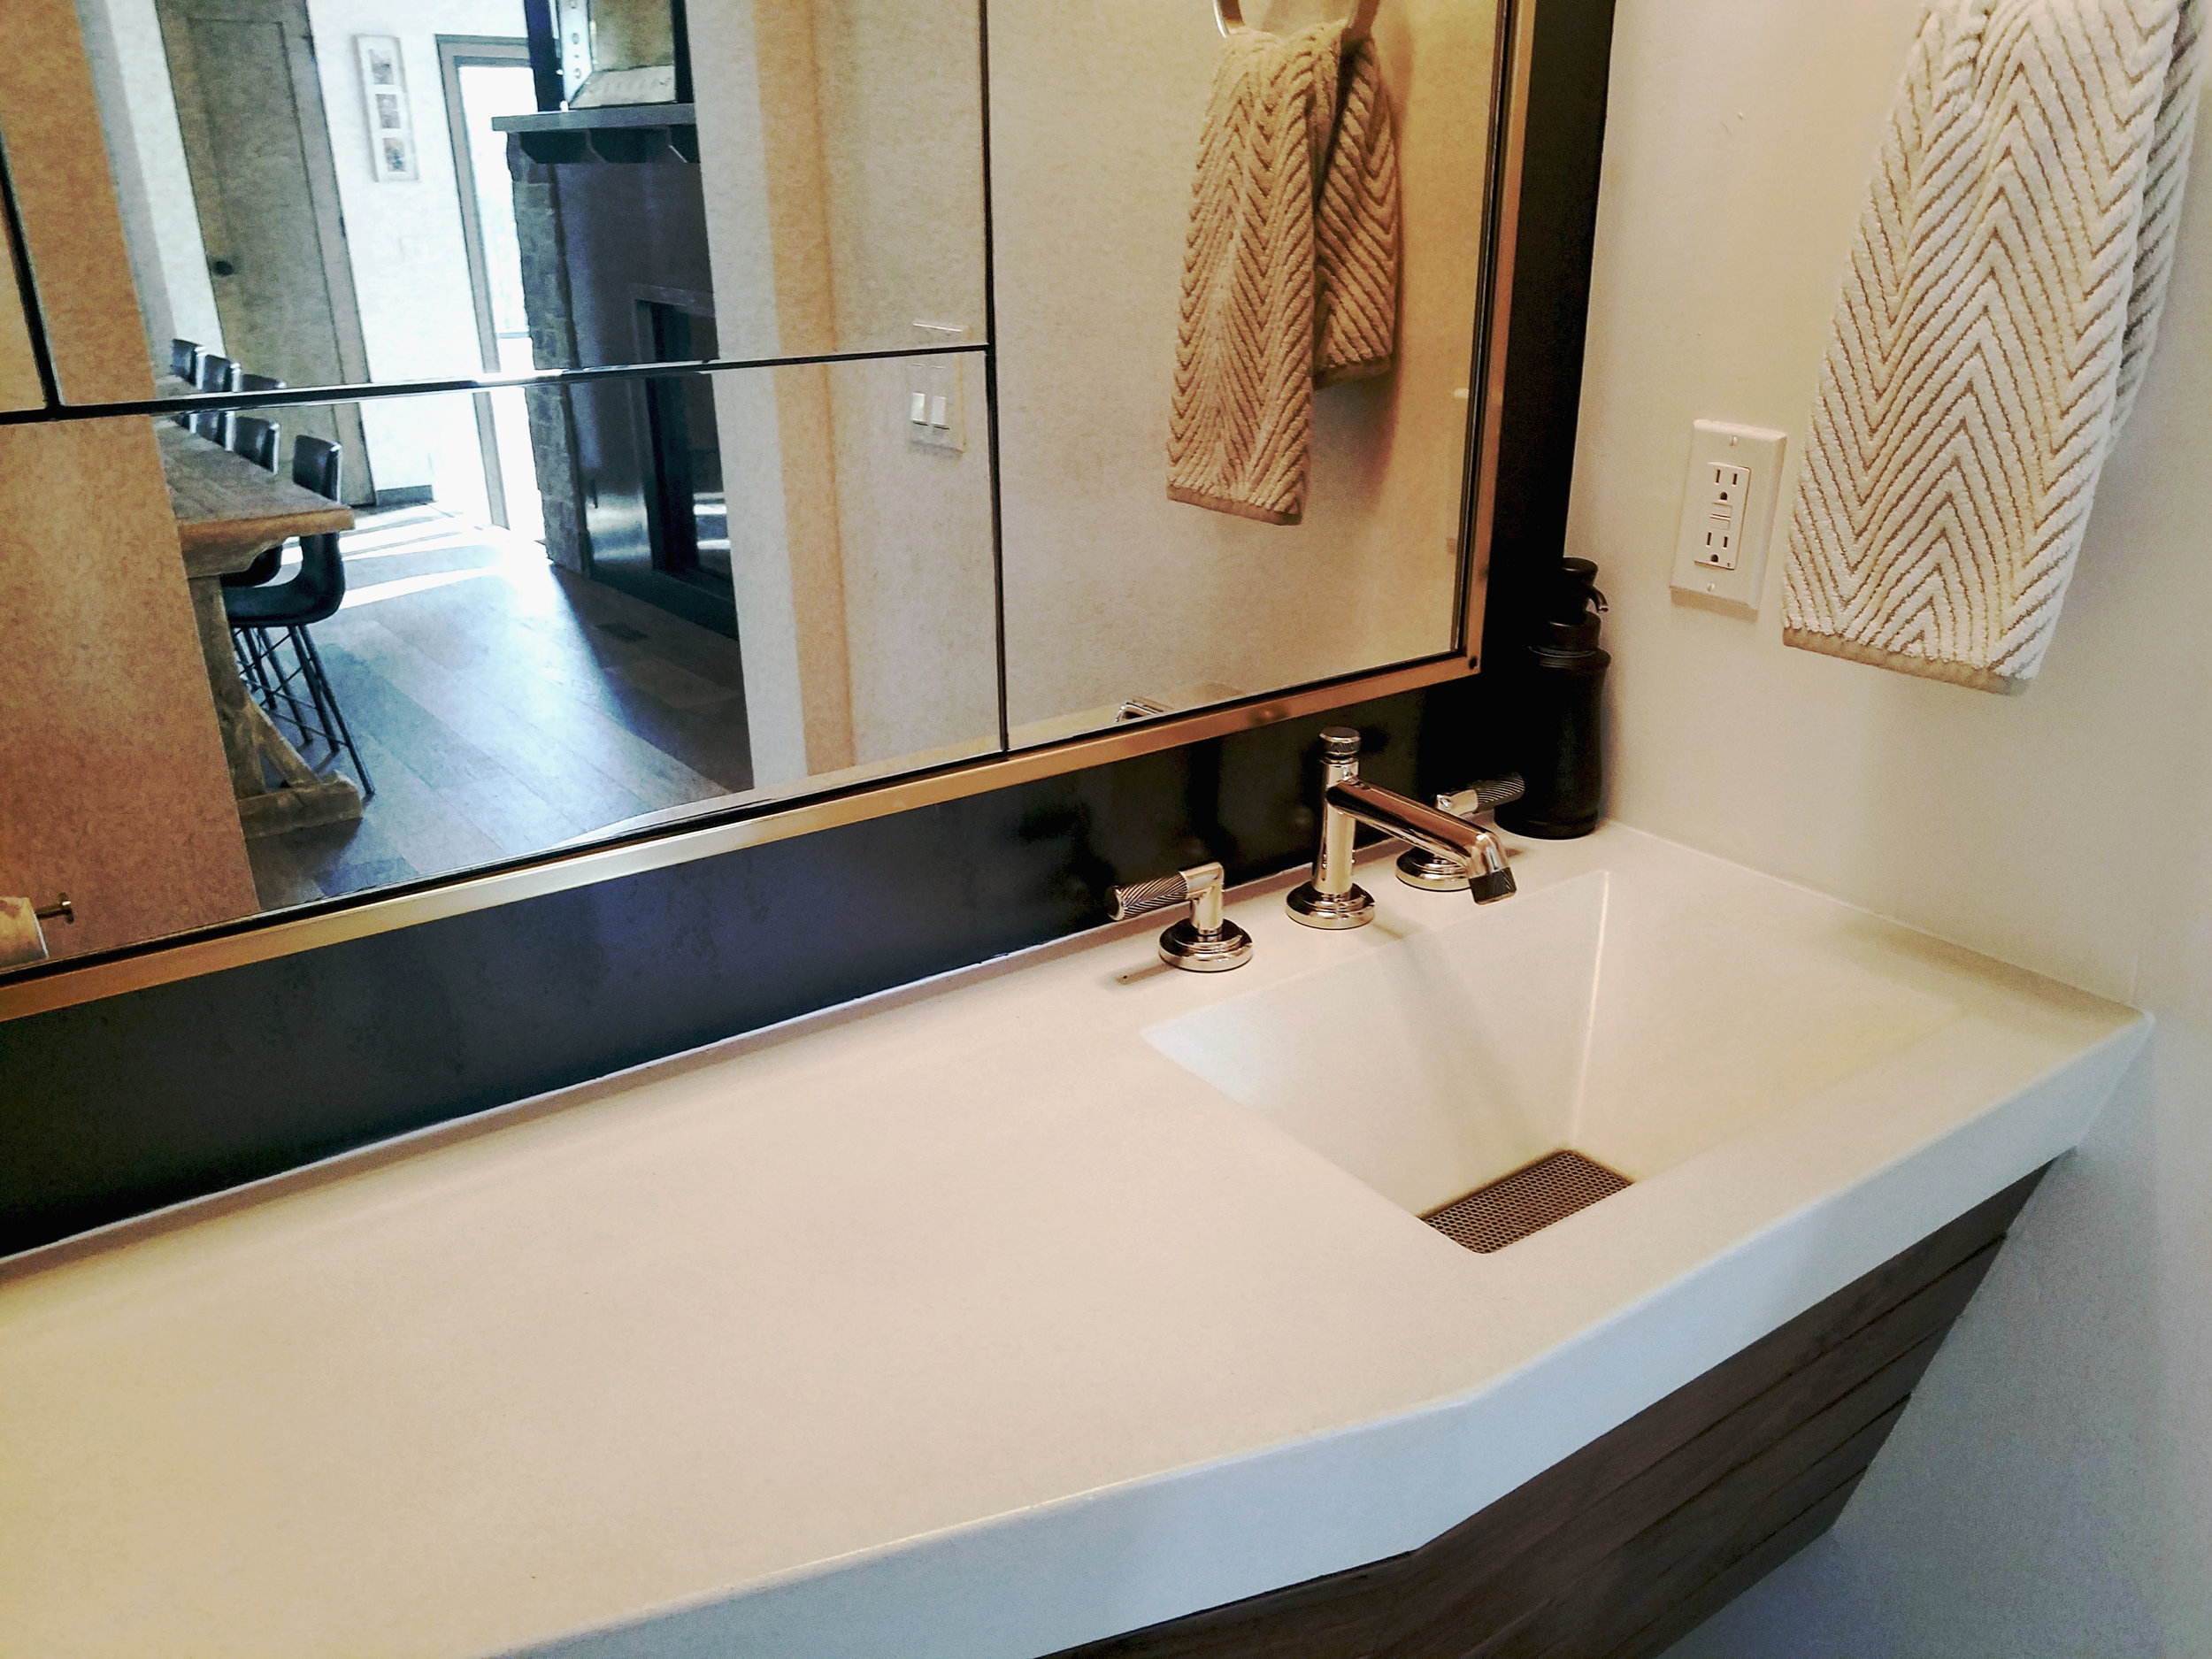 Copy of White Concrete Sink with Perforated Stainless Steel Drainpan.jpg